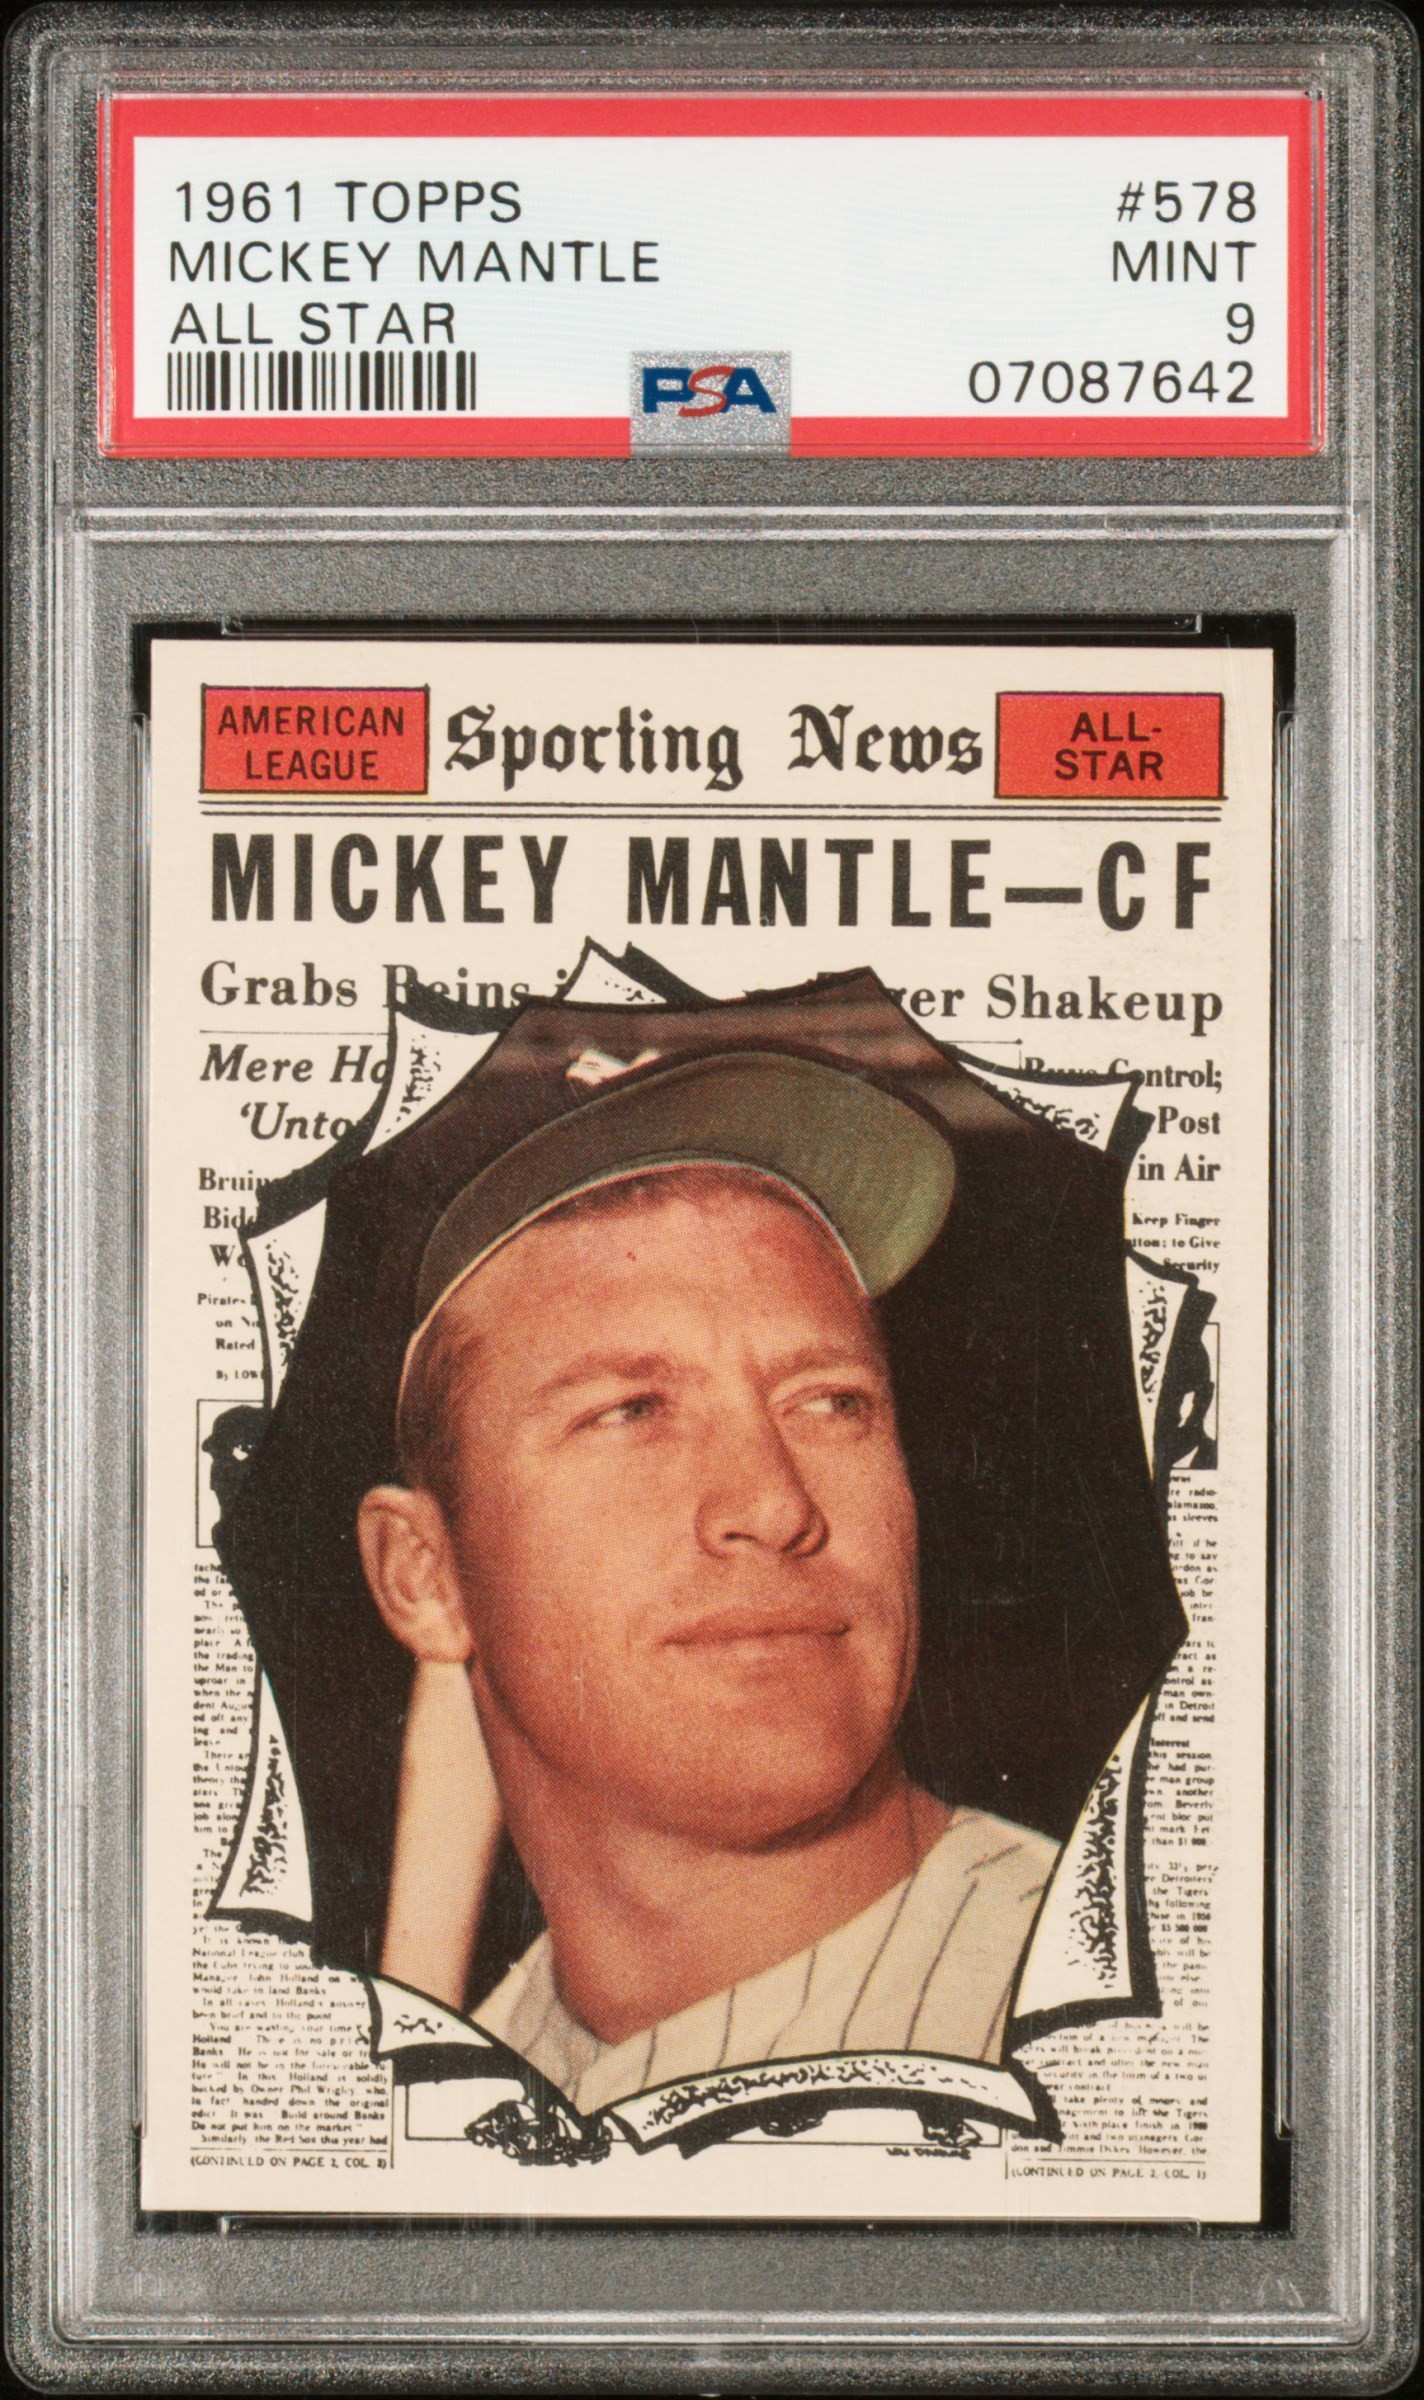 1961 Topps #578 Mickey Mantle, All Star - PSA MINT 9